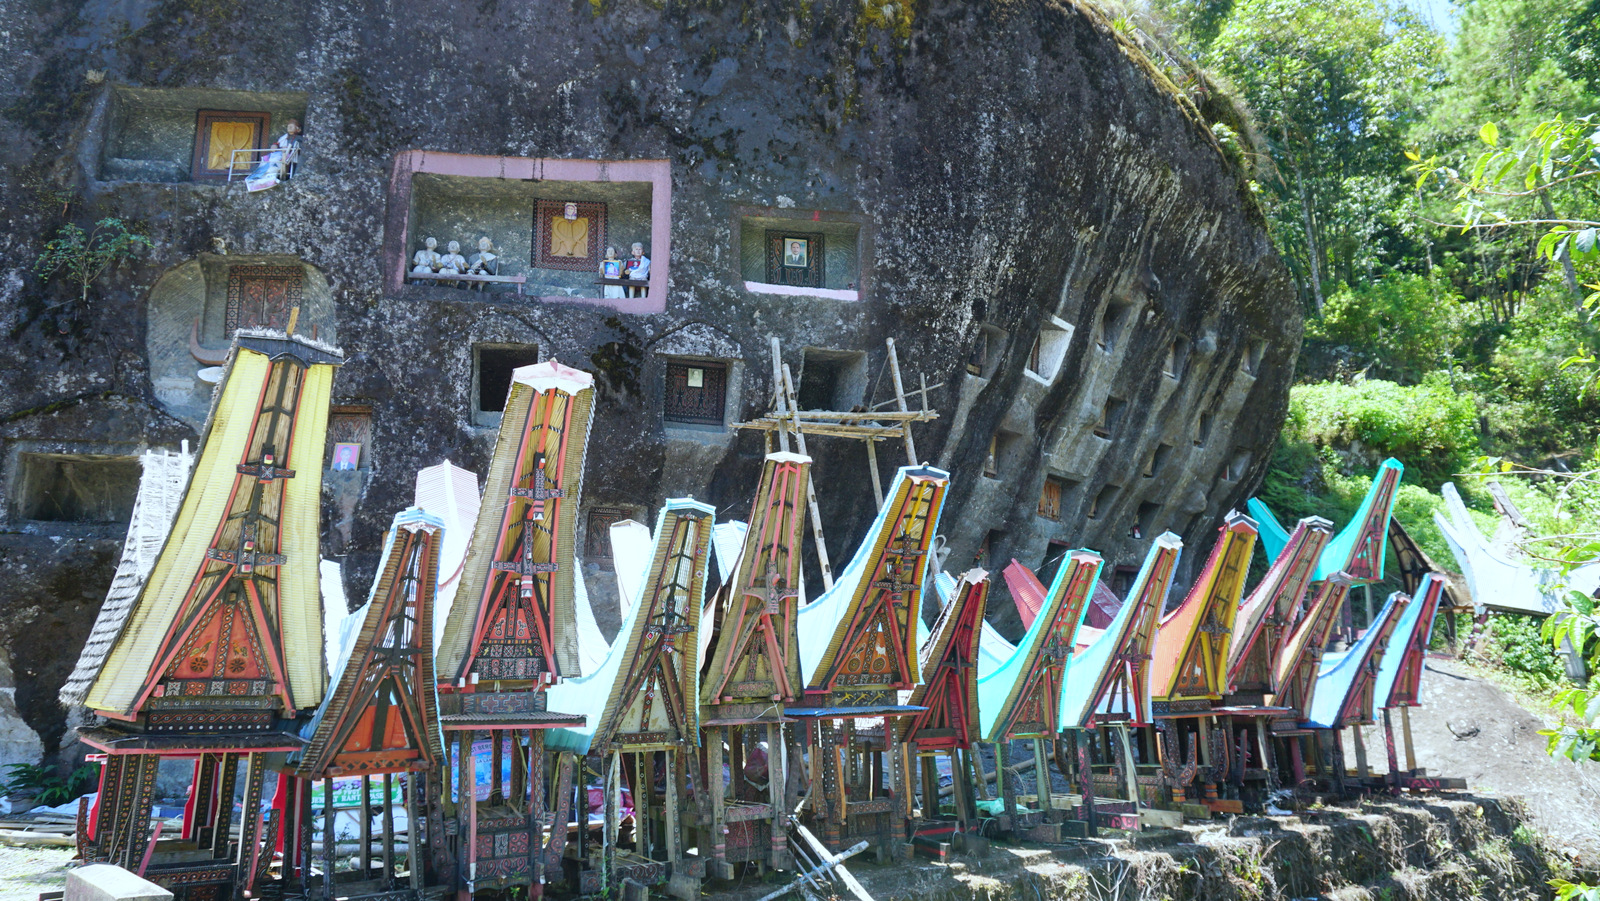 Colourful miniature tongkonans stand before a large rock with smaller burial chambers in Loko’mata. Photo by Upneet Kaur-Nagpal